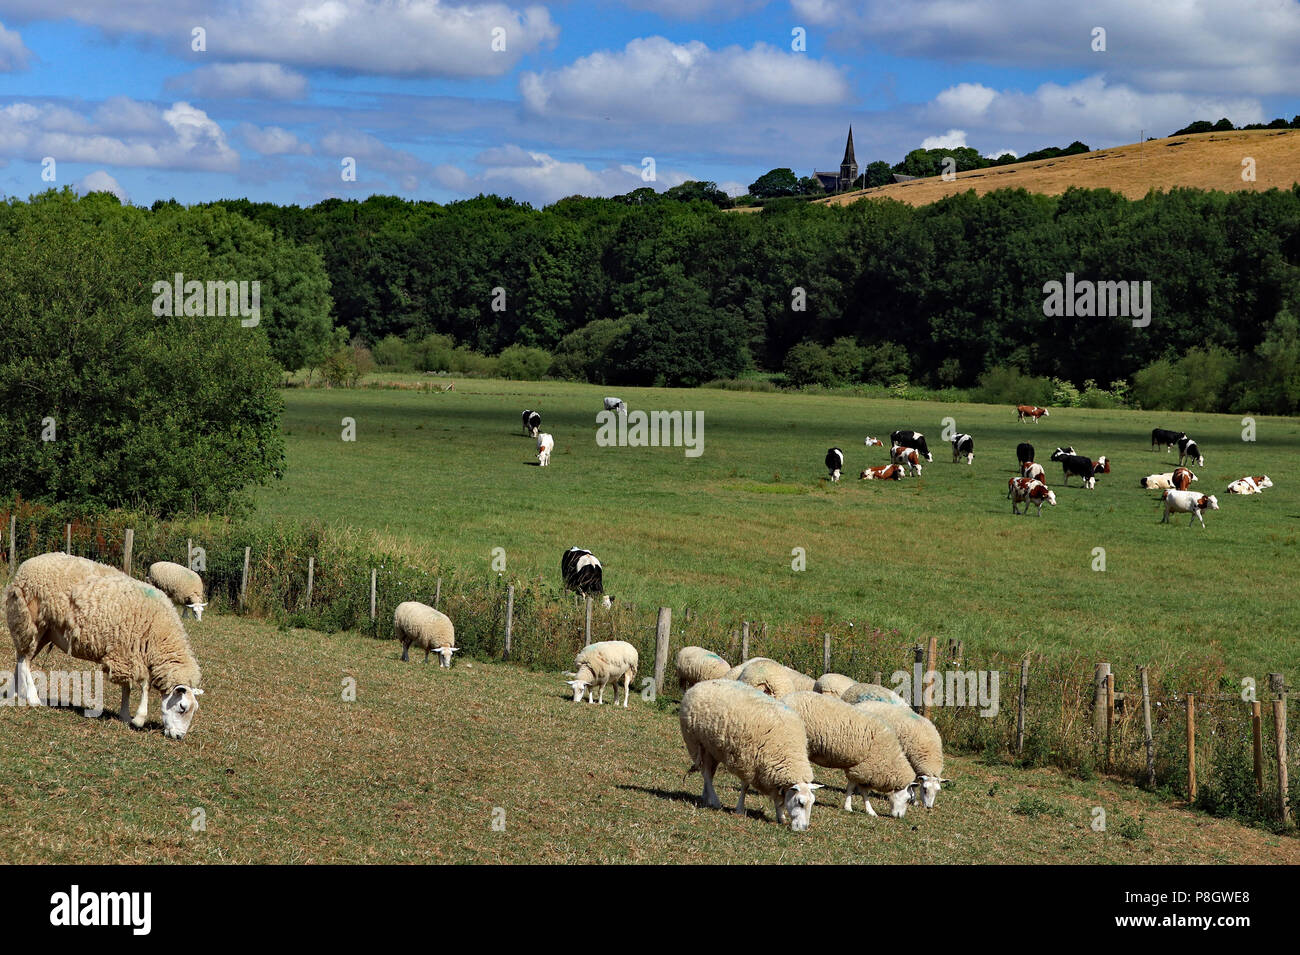 Sheep and cows grazing on farmland in the river Douglas valley in Lancashire below Parbold Hill, under a blue sky with fluffy white clouds. Stock Photo